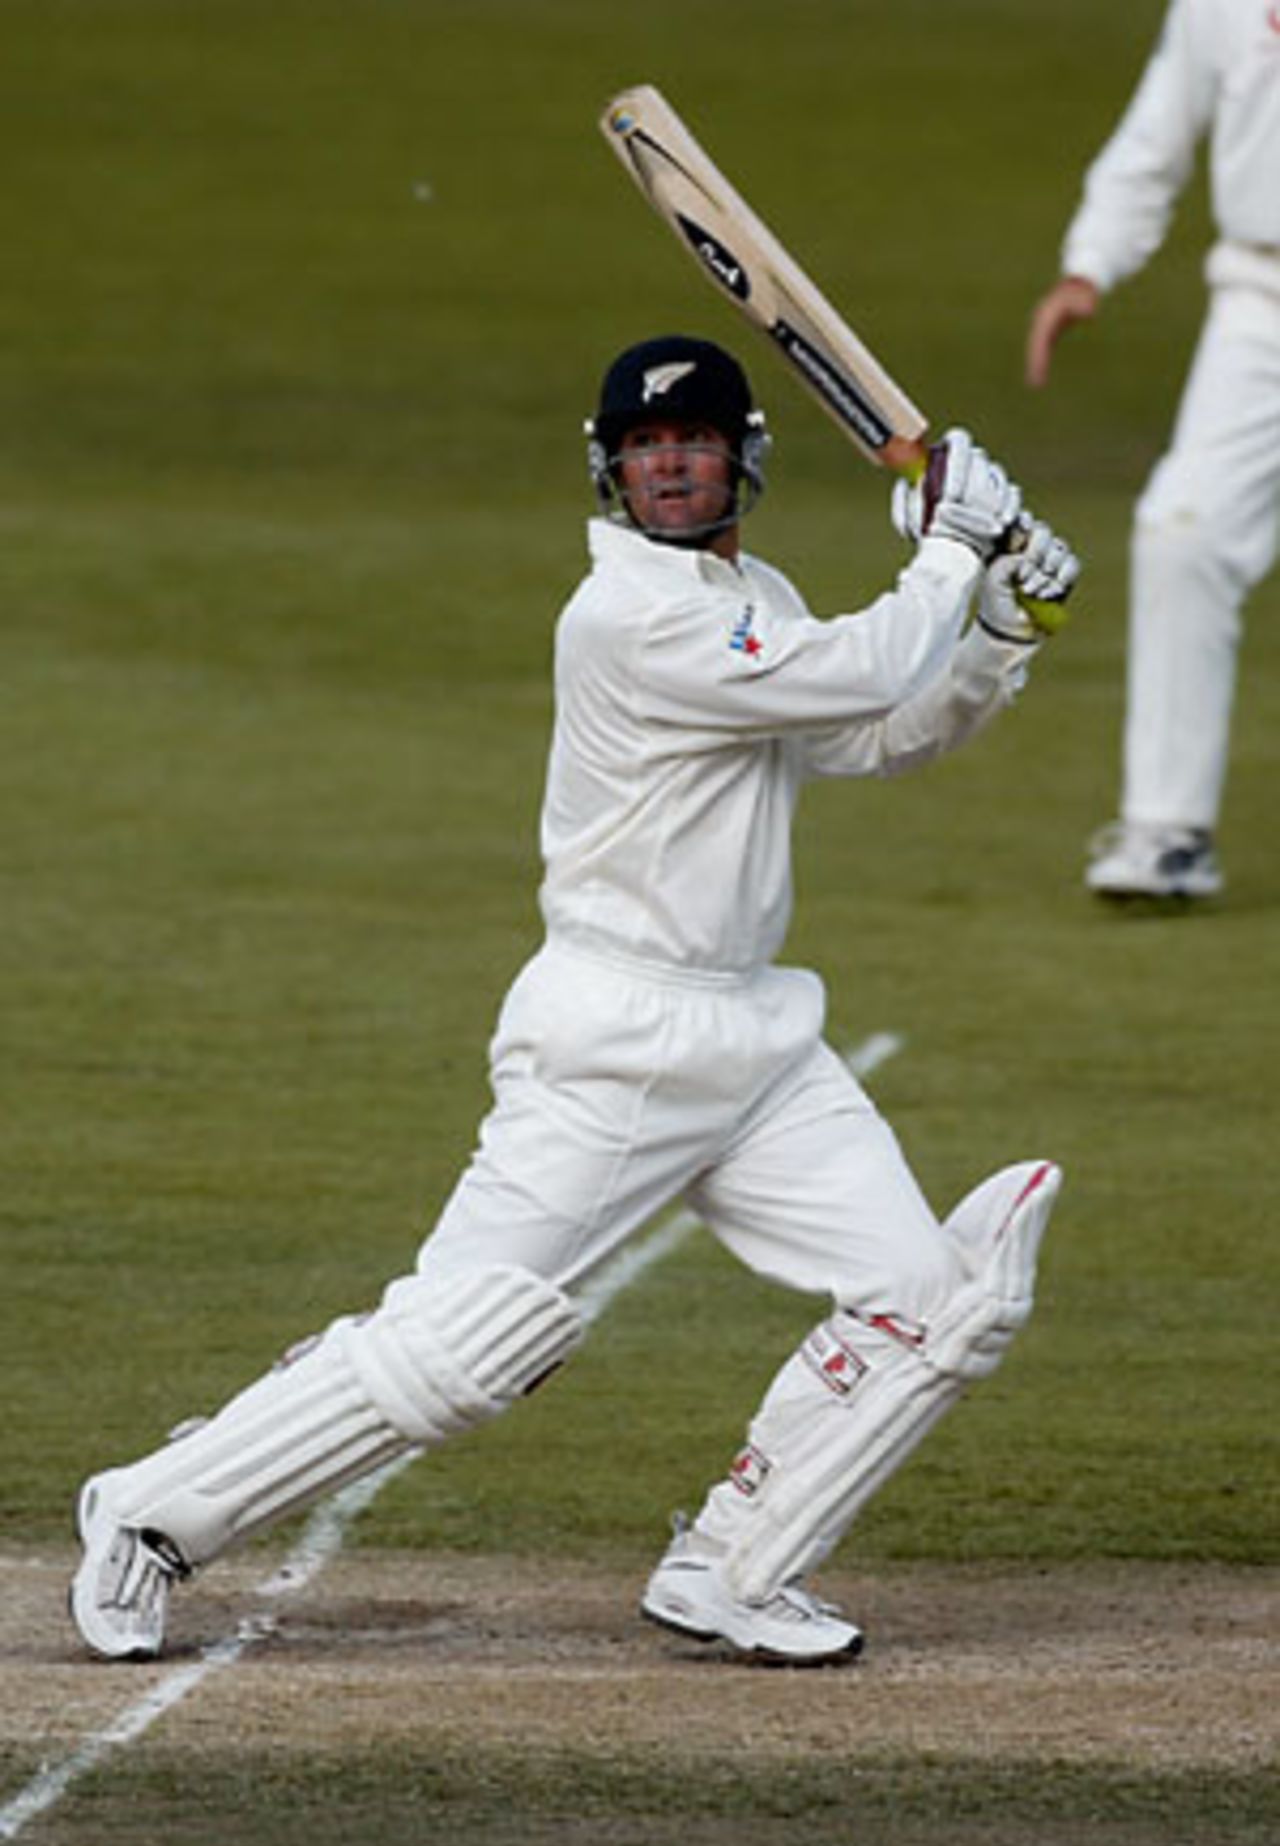 New Zealand batsman Nathan Astle cuts a delivery over backward point during his second innings of 222. 1st Test: New Zealand v England at Jade Stadium, Christchurch, 13-17 March 2002 (16 March 2002).